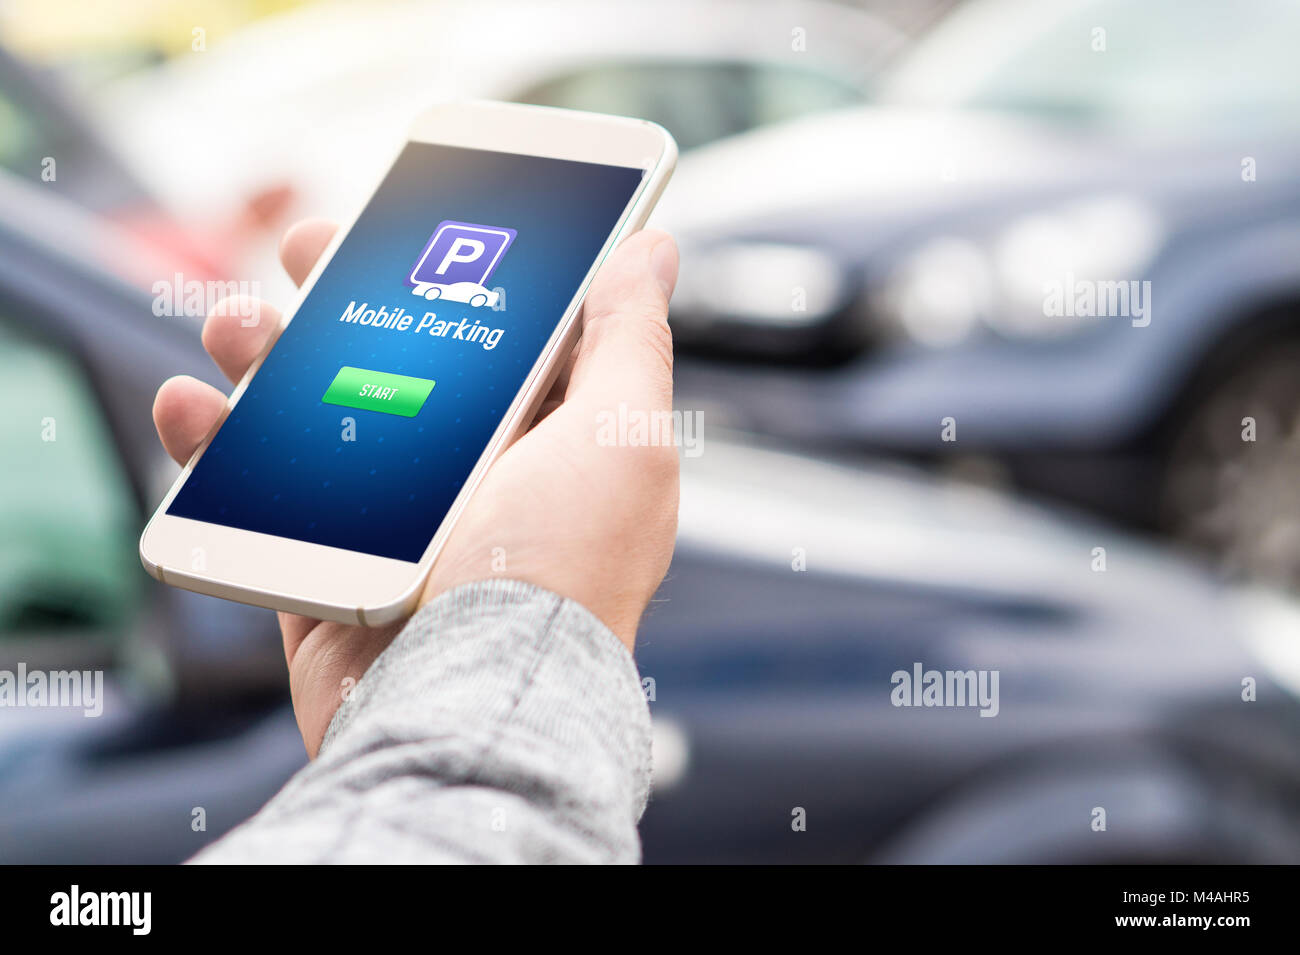 Mobile parking app on smartphone screen. Man holding smart phone with car park application in hand. Internet payment online with modern device. Stock Photo